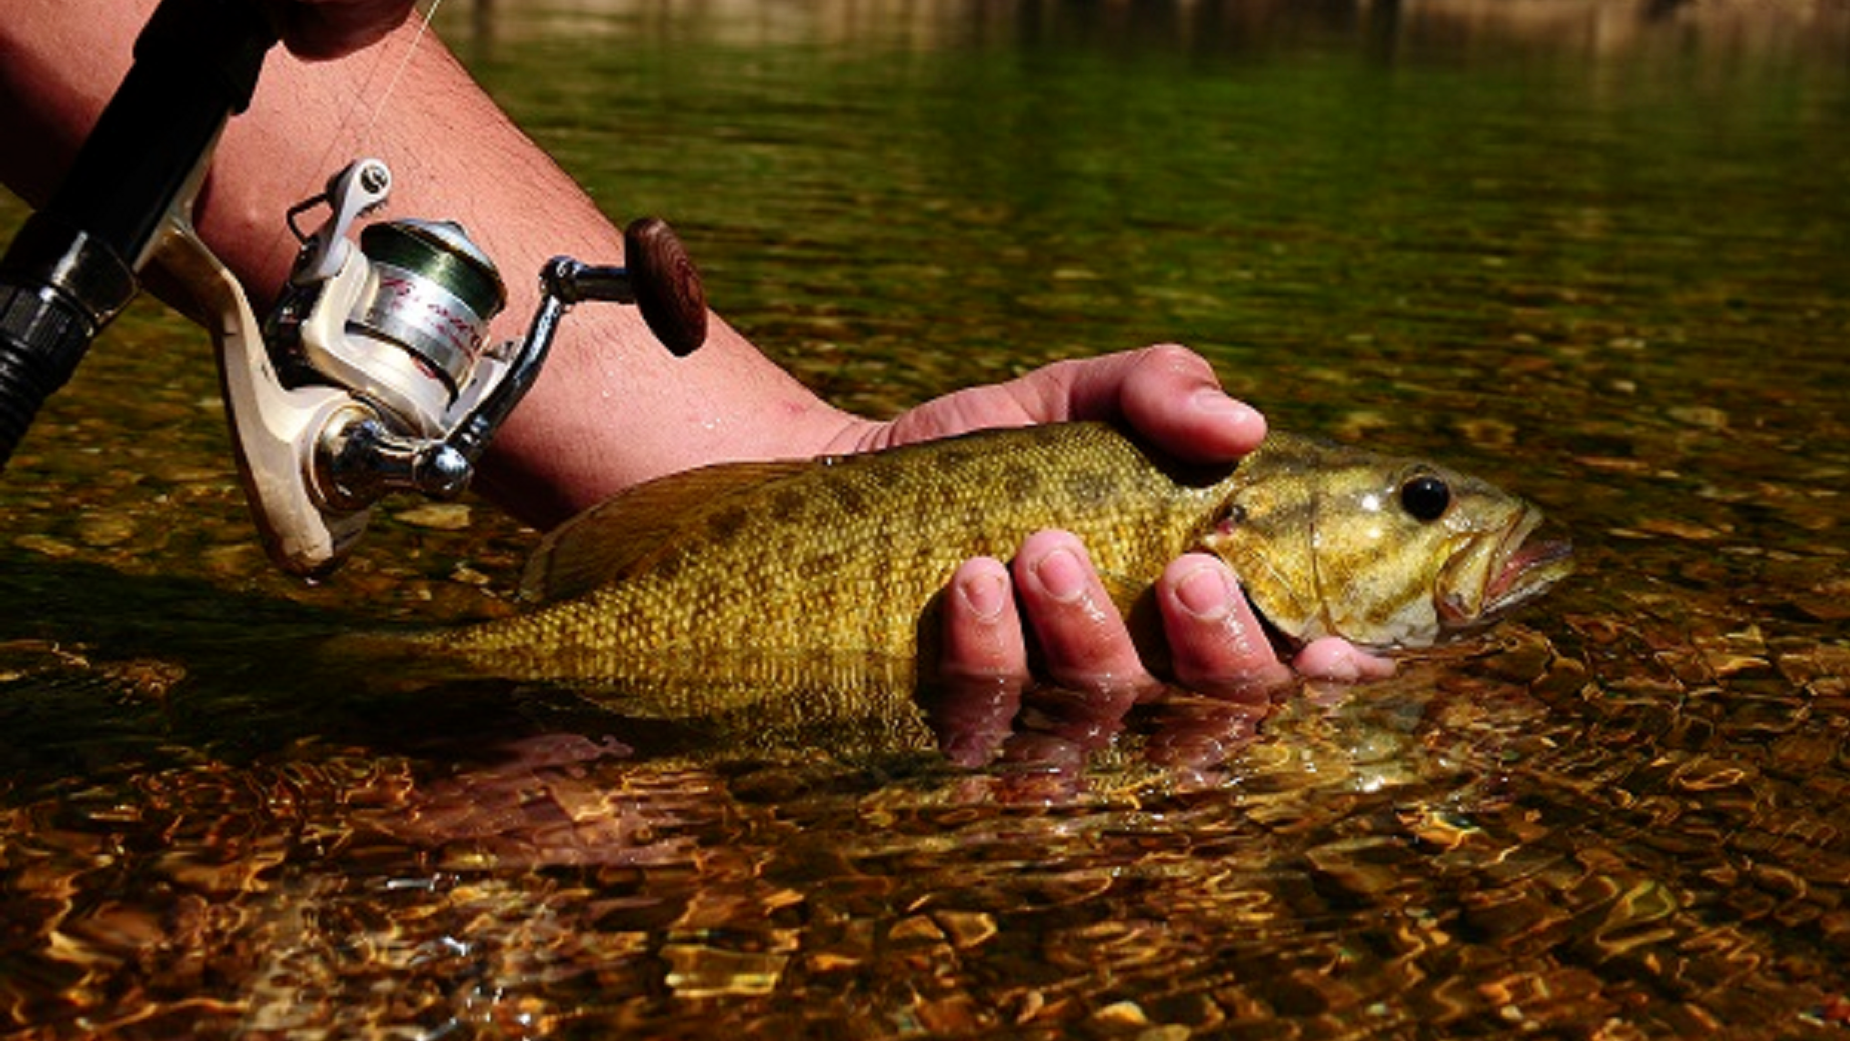 A fisherman releasing a smallmouth bass